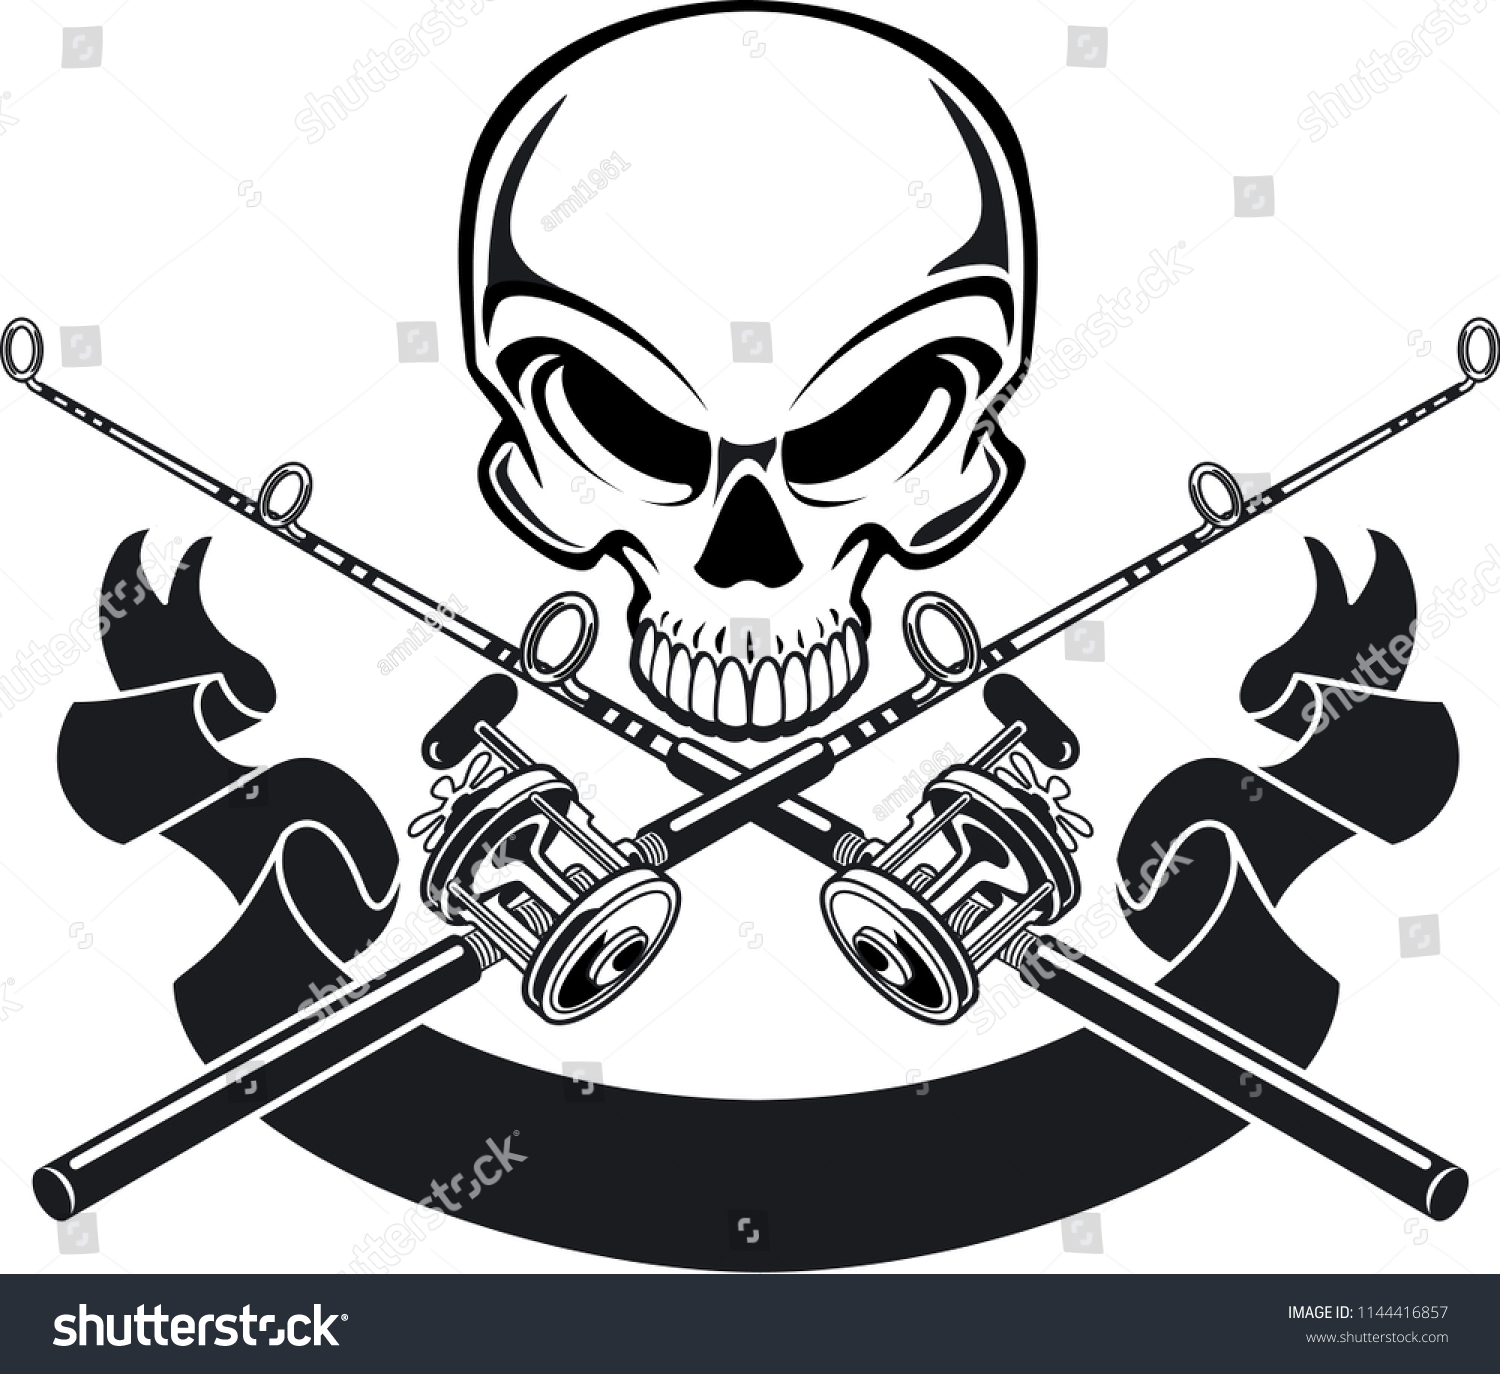 SVG of human skull with crossing fishing rod and reel svg